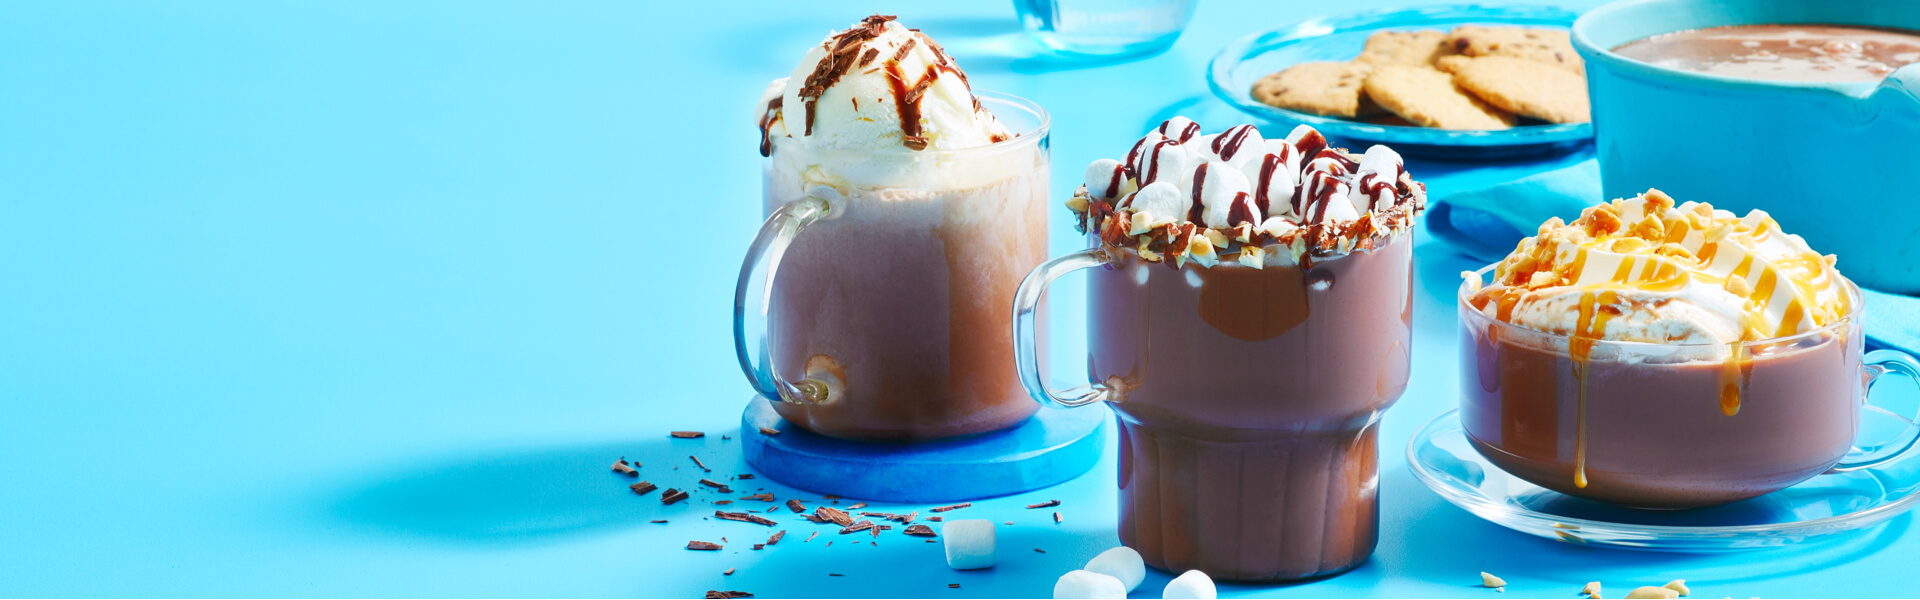 3 clear heat-proof mugs filled with different flavours of hot chocolate and toppings